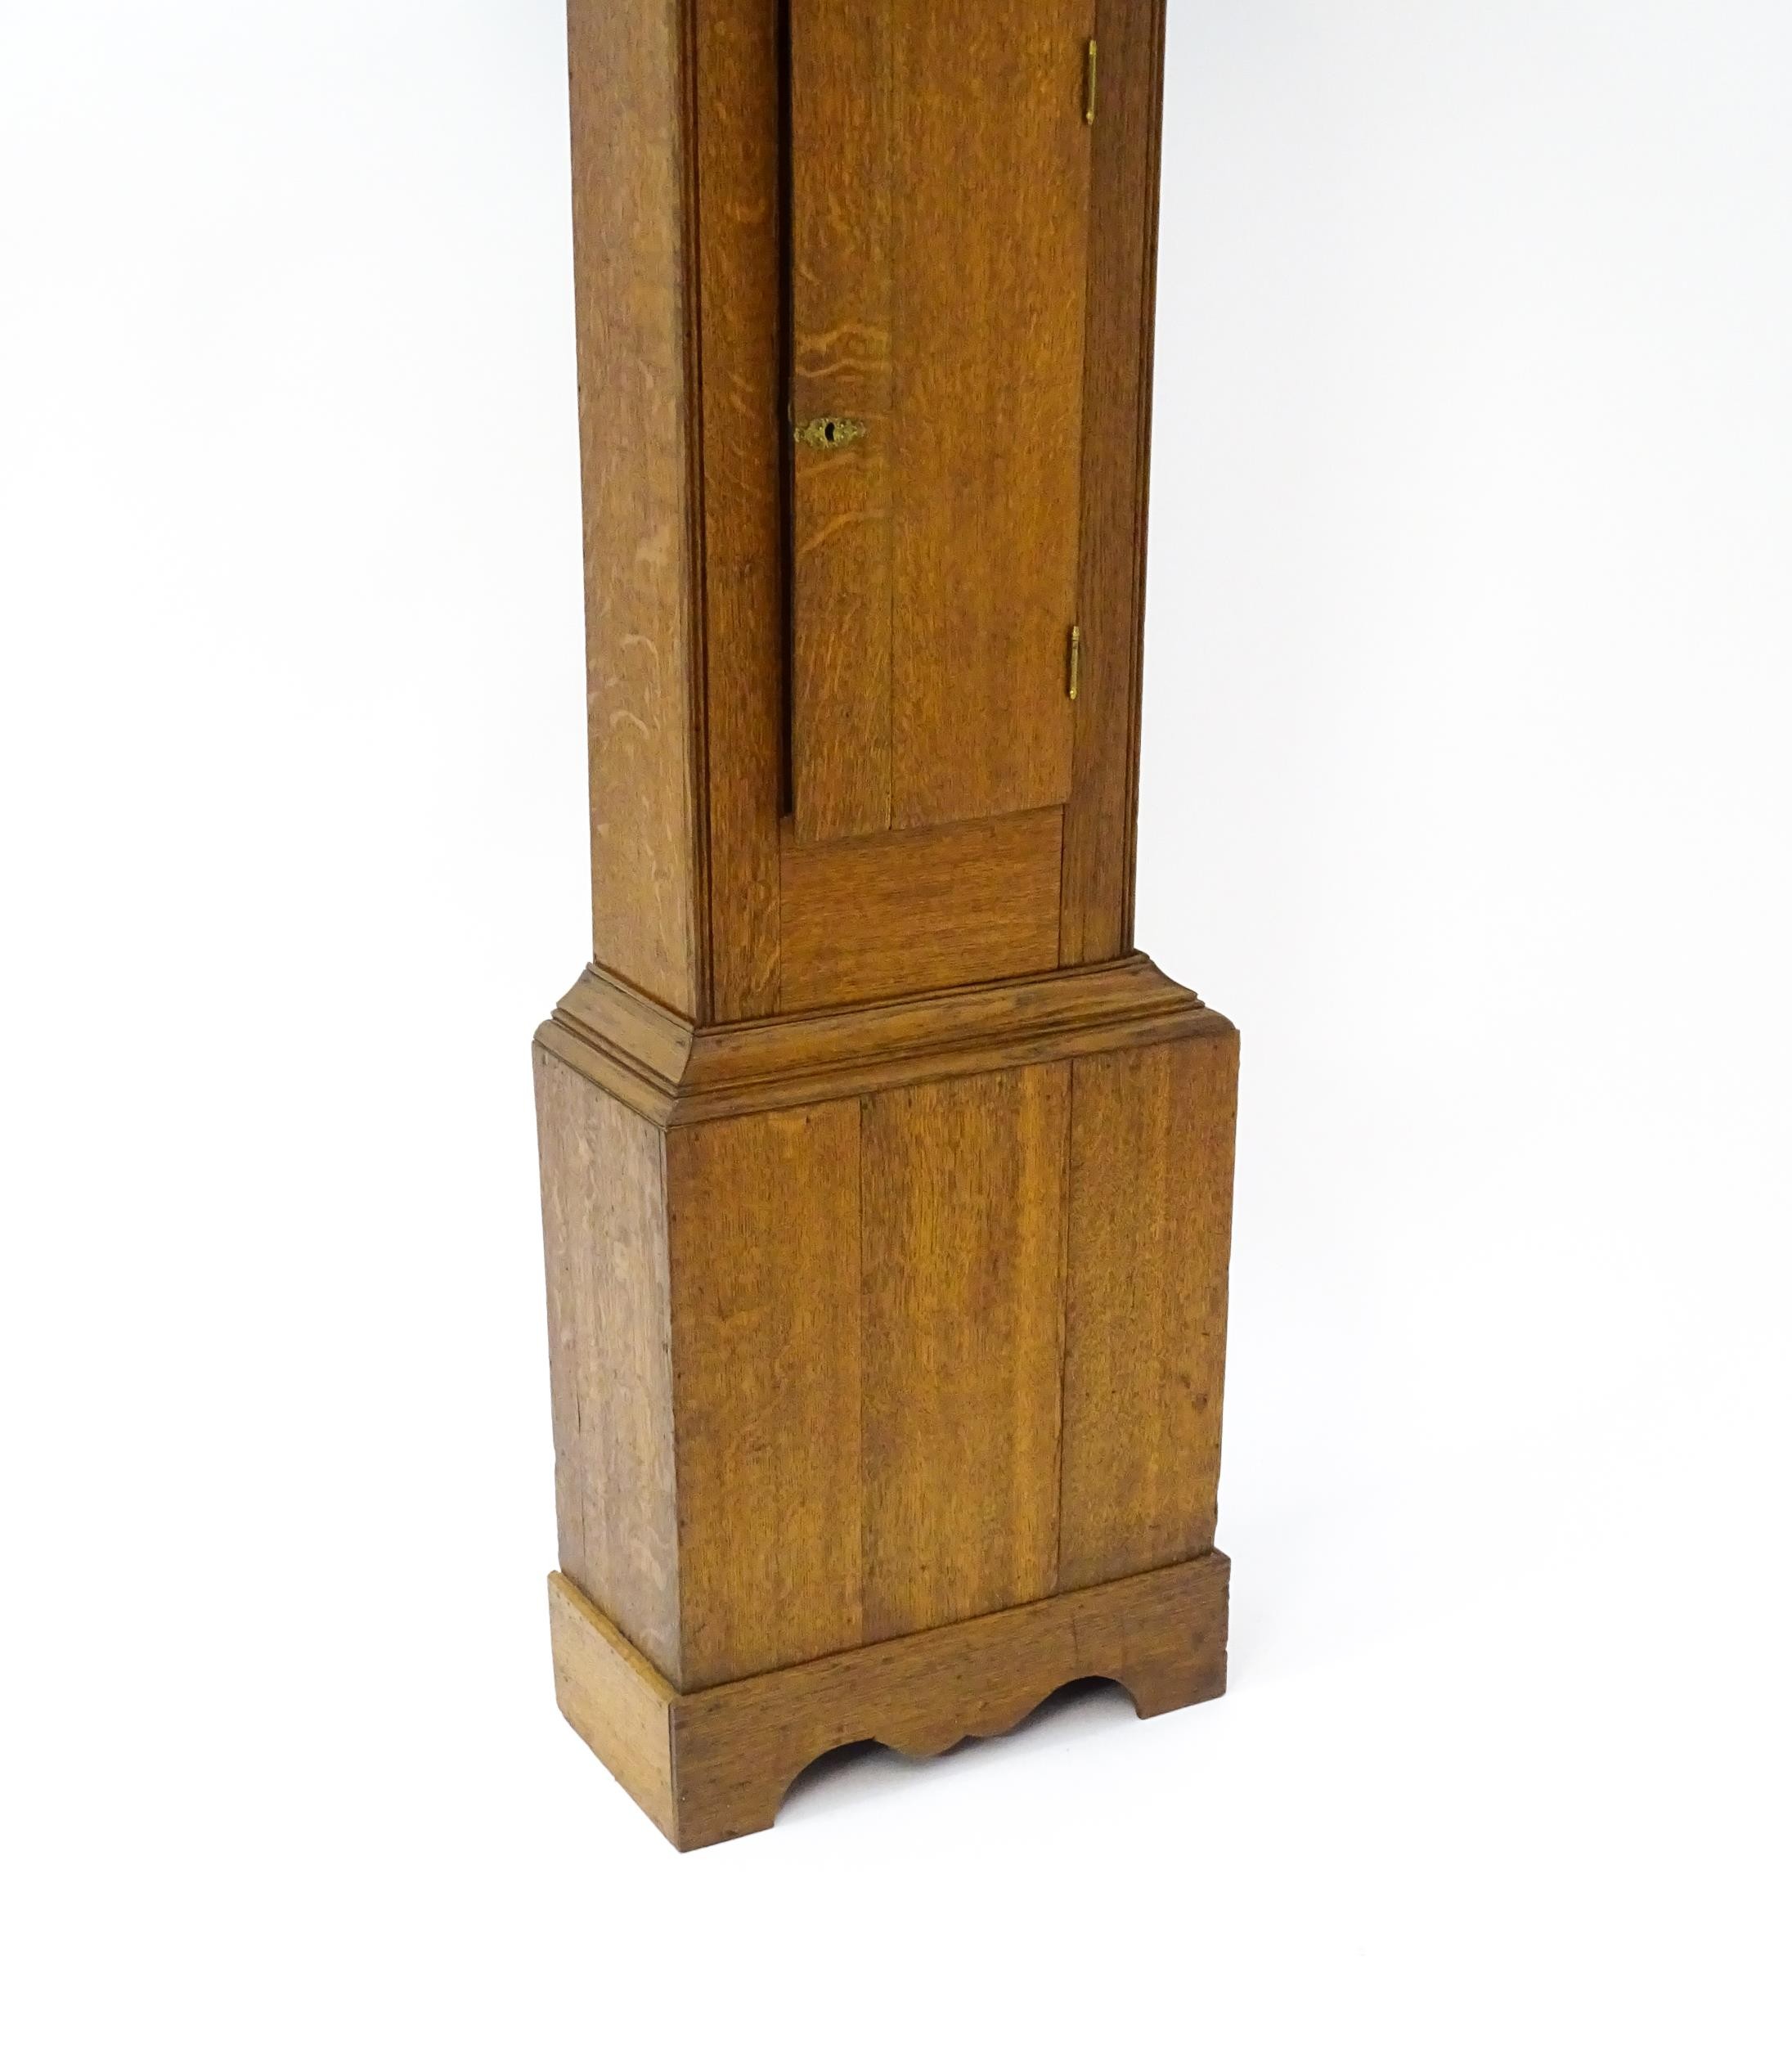 P Selby Wareham - Dorset : A late 18thC oak cased 30 hour longcase clock, the painted dial signed P. - Image 11 of 12